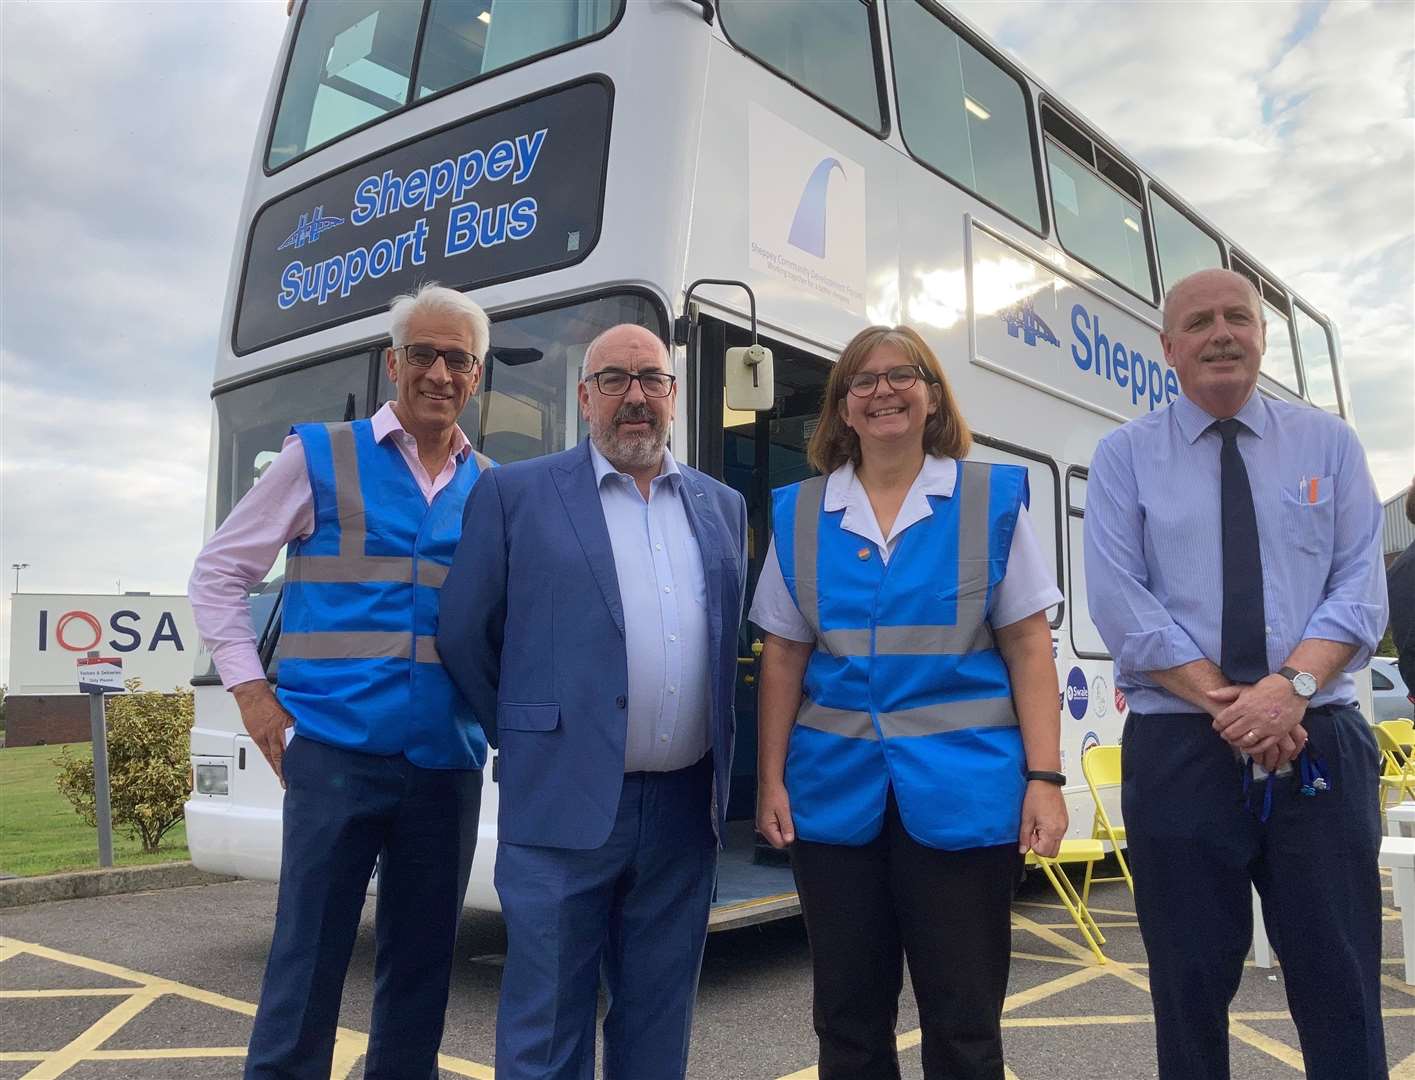 Sheppey Support Bus launch with, from the left, Steve Chalke, Tim Lambkin, Lynne Clifton and Paul Murray at the Minster campus of the Oasis Academy Isle of Sheppey